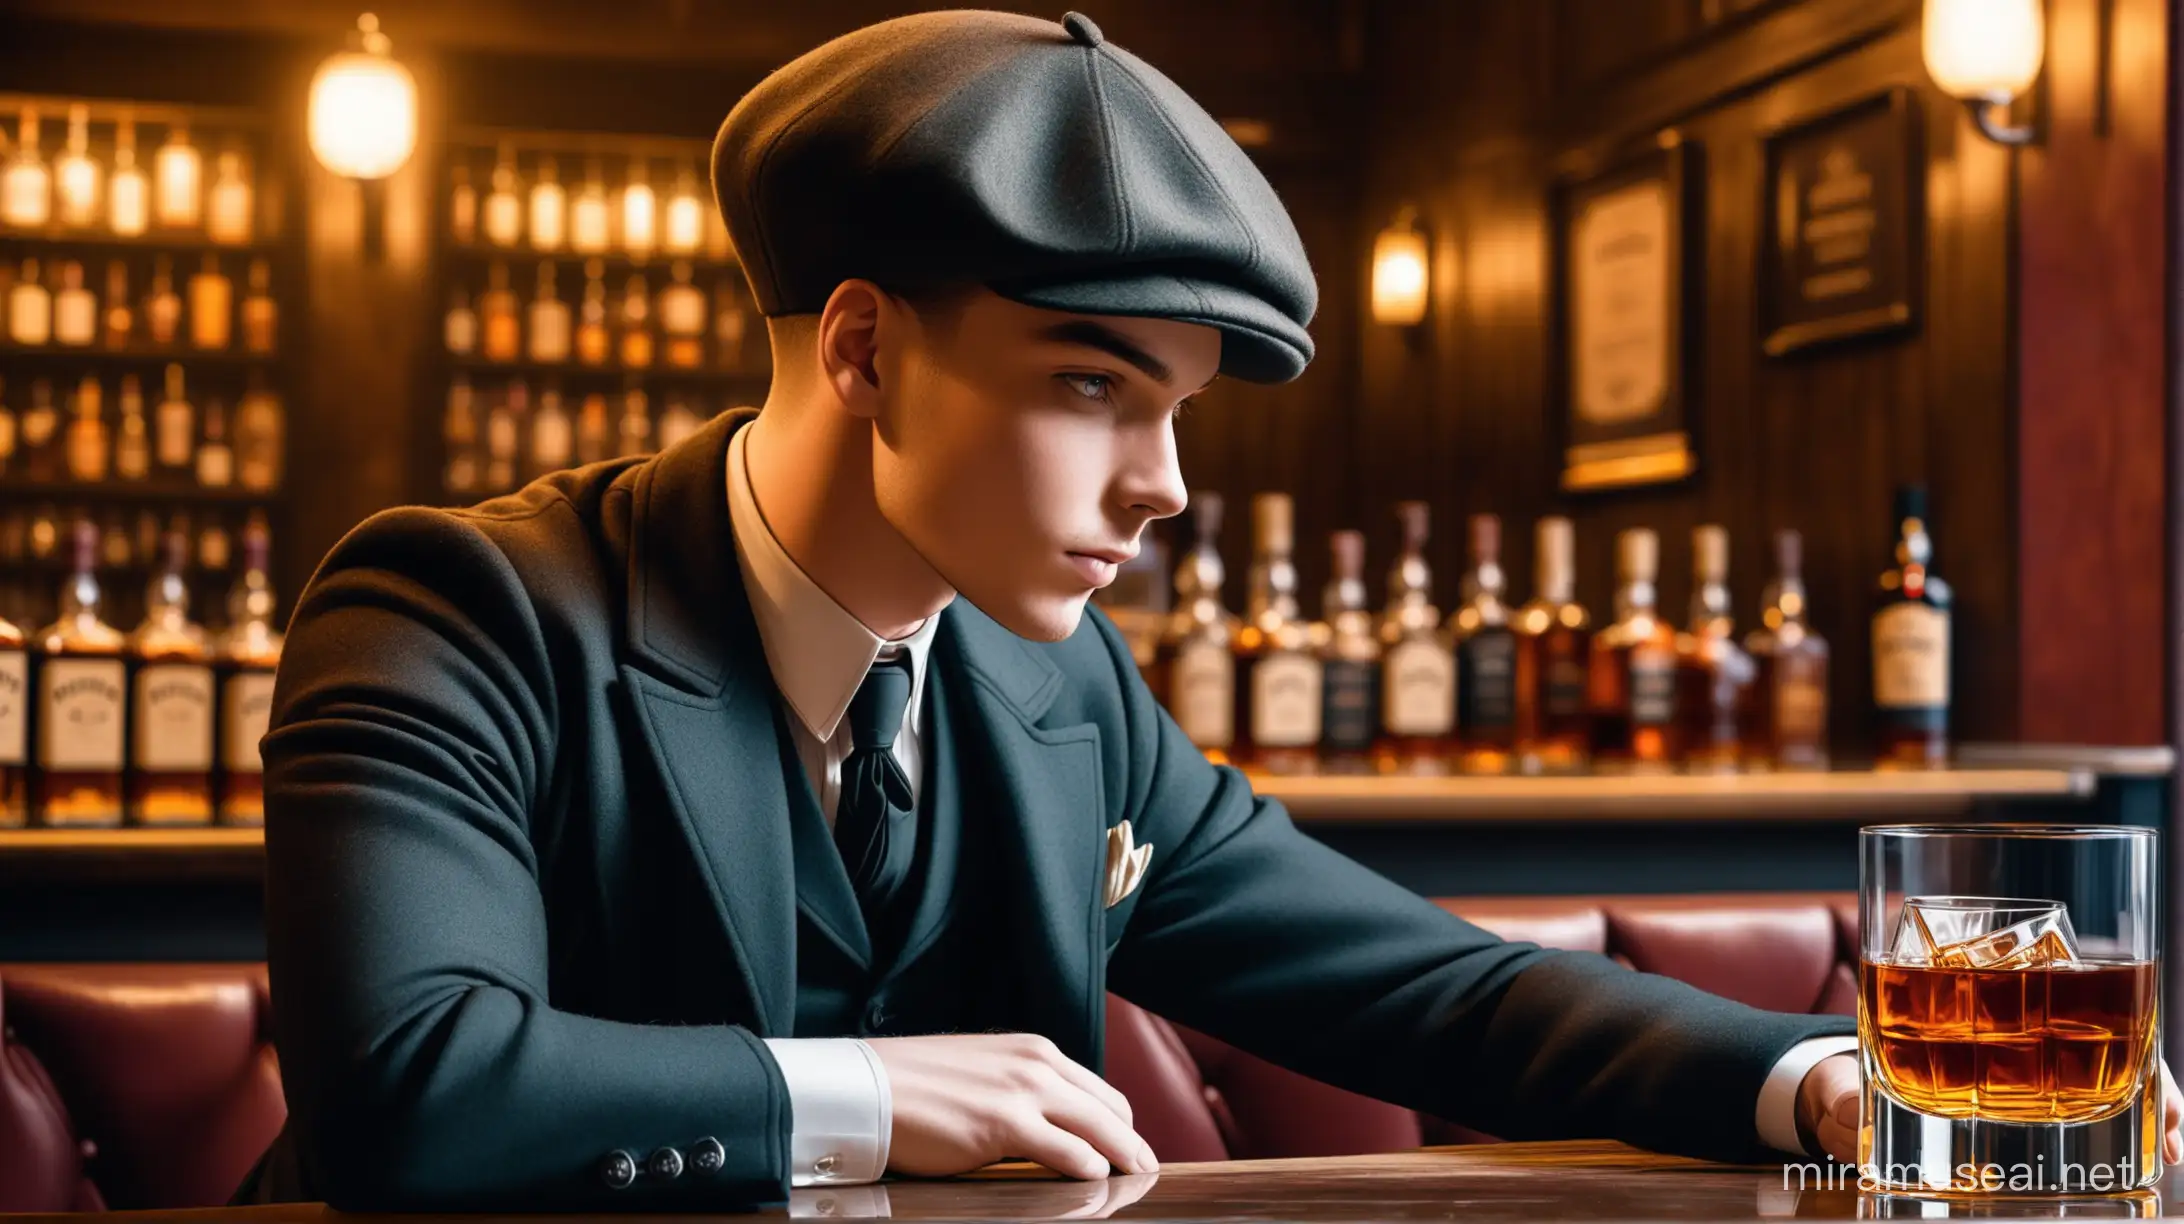 Stylish Man in Vintage Bar with Whiskey Glass